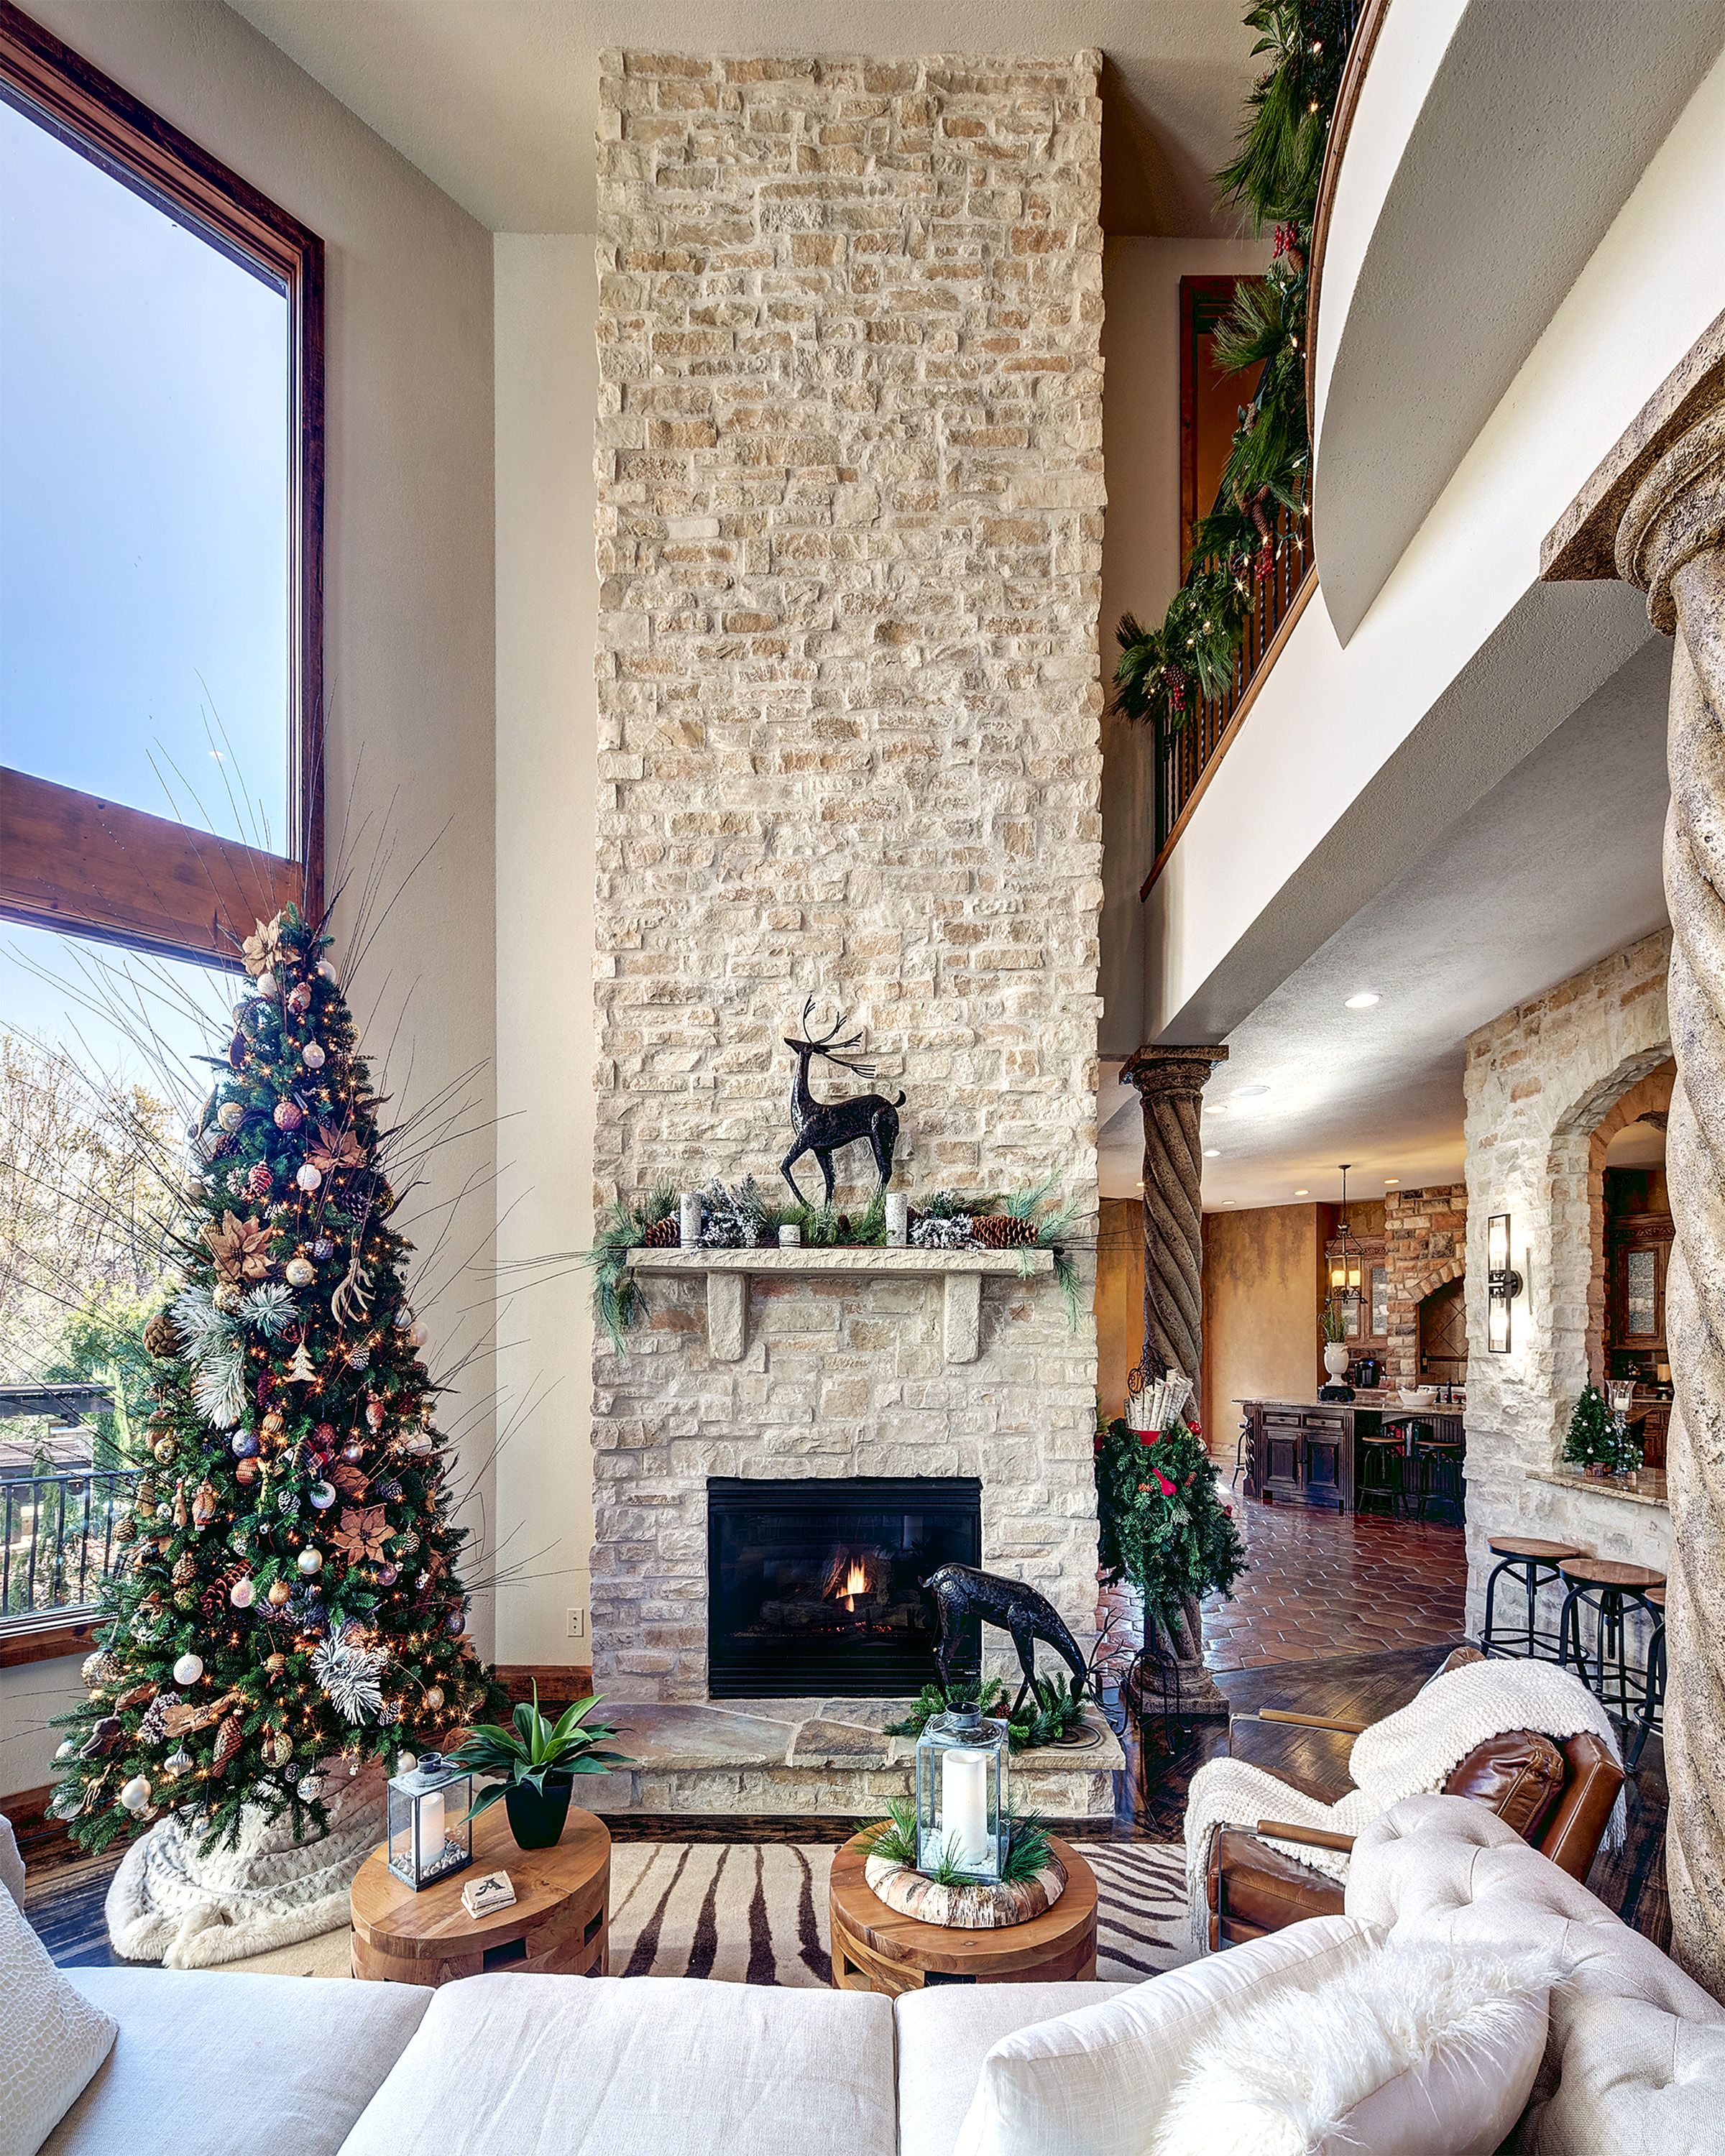 How to Put Stone Veneer On A Fireplace Elegant Indoor Project Idea for Your Fireplace Profile Canyon